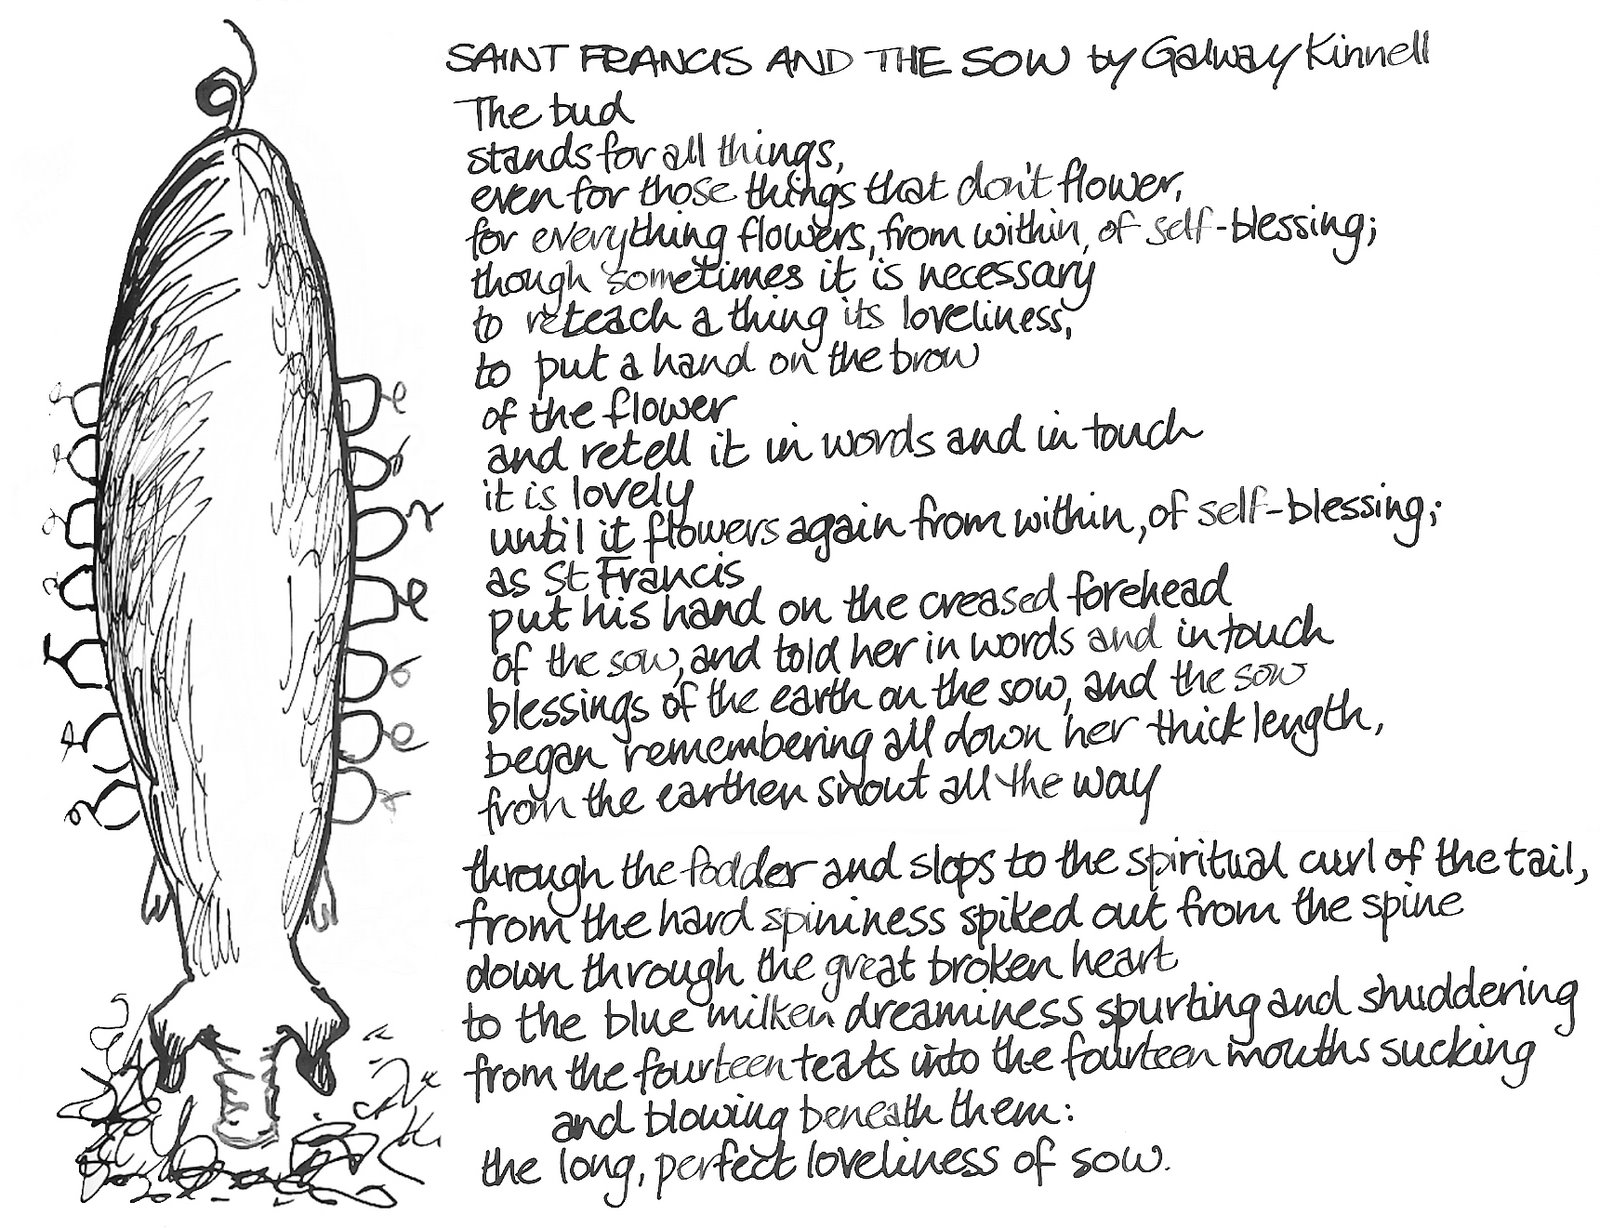 [St+Francis+&+the+Sow.jpg]